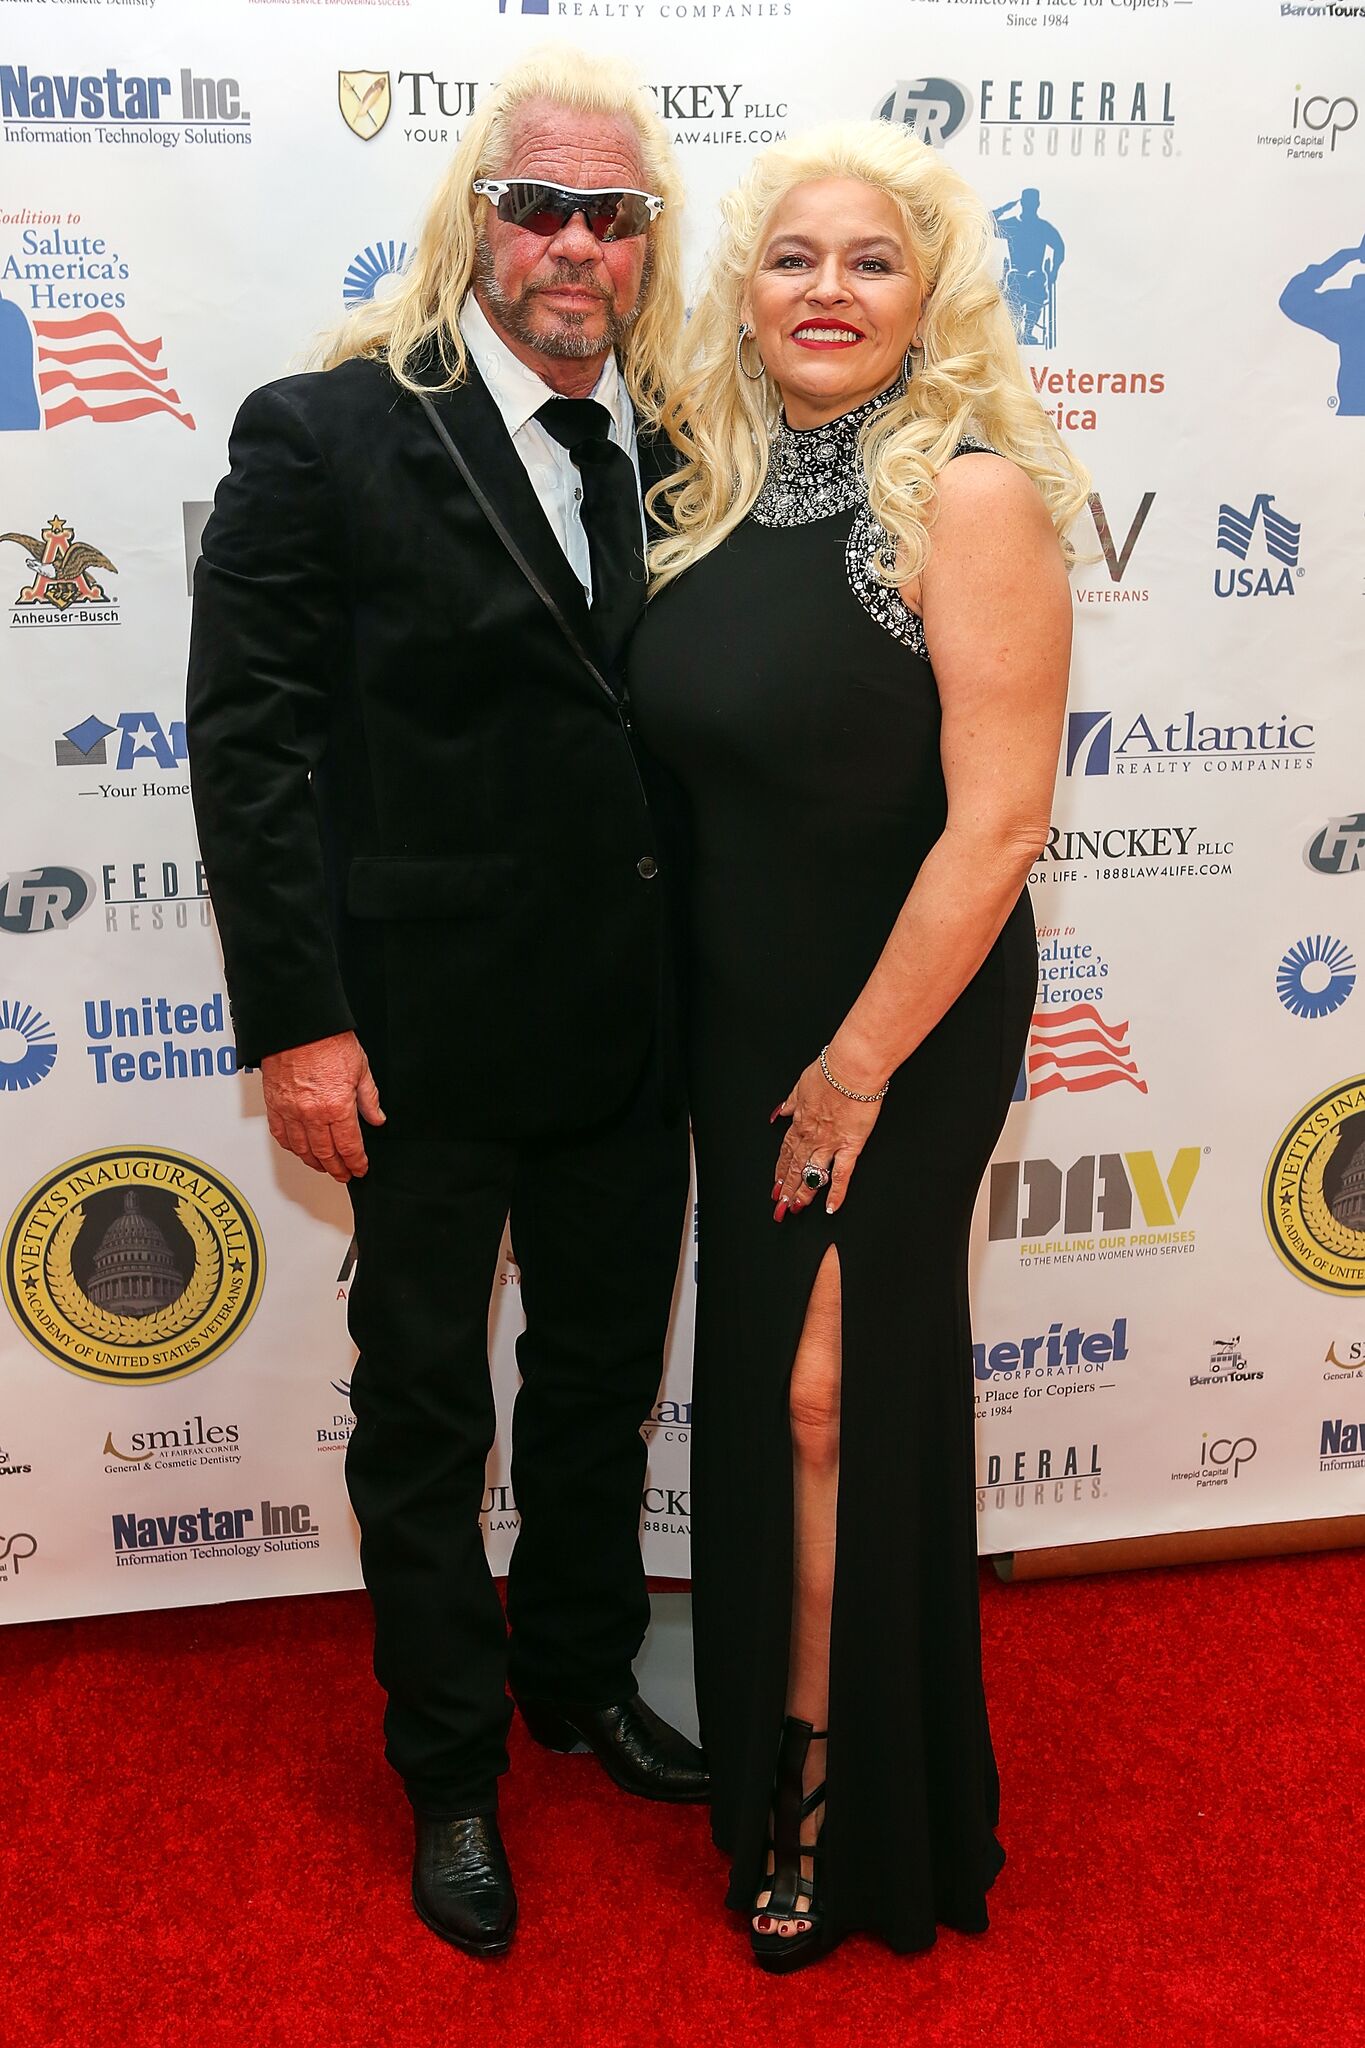 Duane 'Dog the Bounty Hunter" Chapman (L) and Beth Chapman attend the Vettys Presidential Inaugural Ball | Getty Images